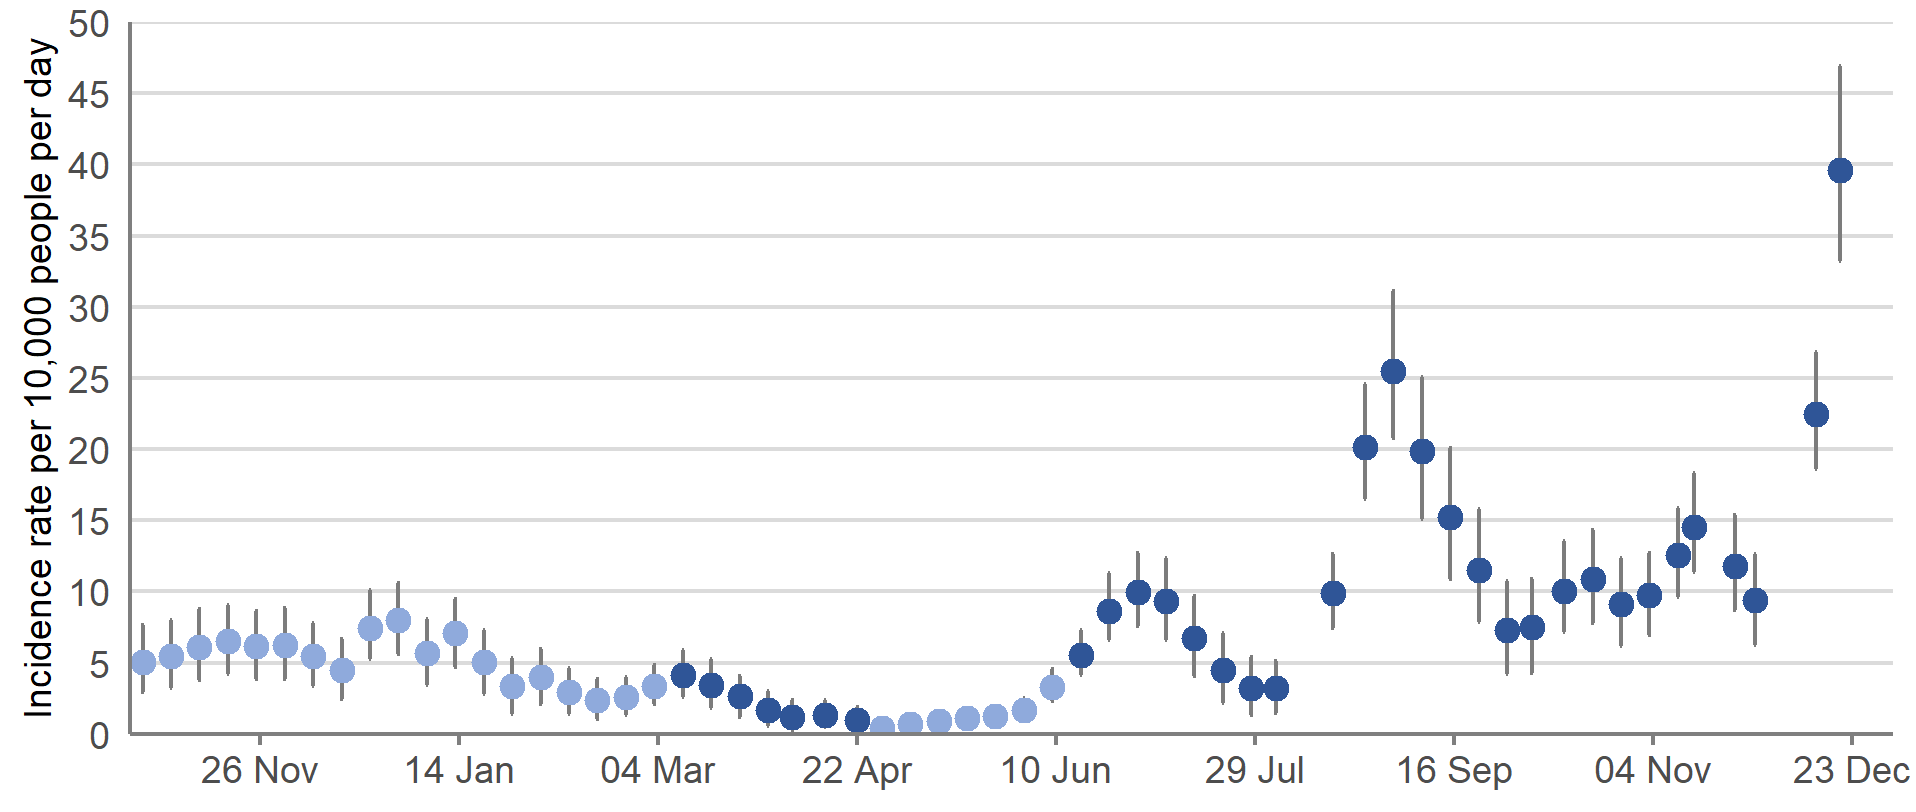 Official reported/indicative estimates of incidence rates in Scotland between 25 October 2020 and 23 December 2021, including 95% credible intervals (see notes 4,5,6,13)  Since early-December, the official reported/indicative estimates of incidence rates in Scotland have been rapidly increasing and in the most recent week, estimates are at their highest since the start of the pandemic.